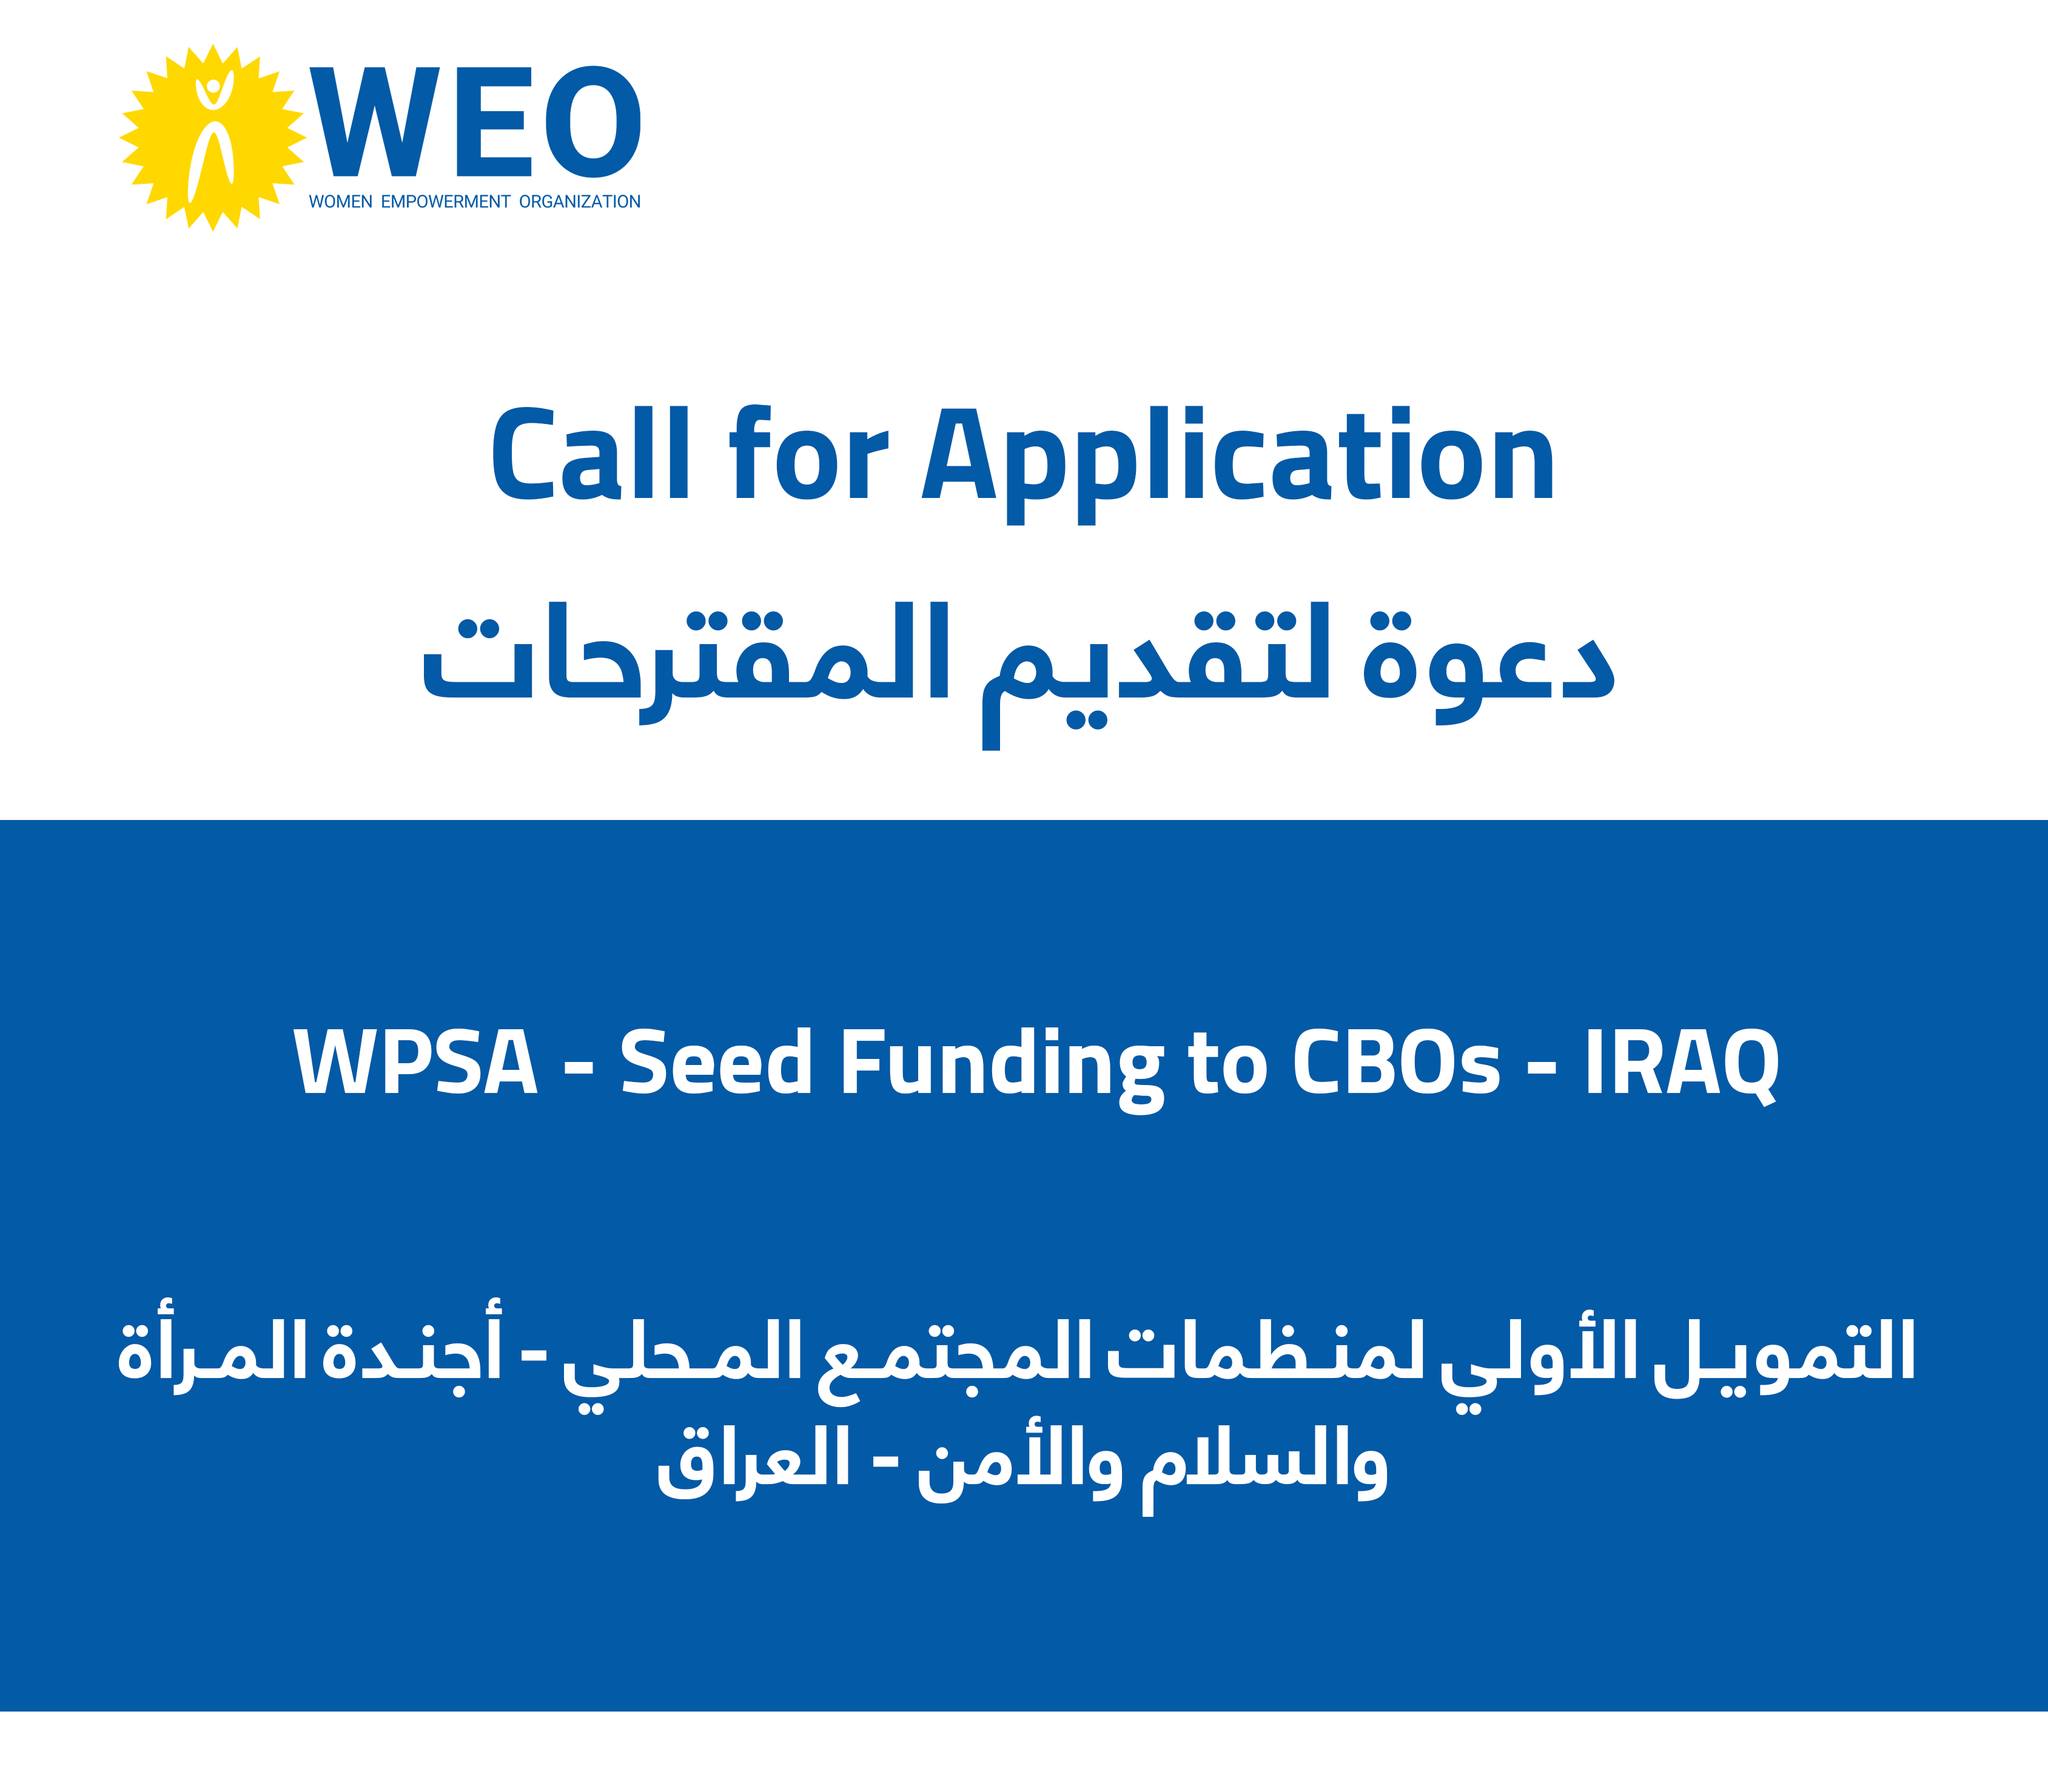 Call for Application - WPSA Seed Funding to CBOs